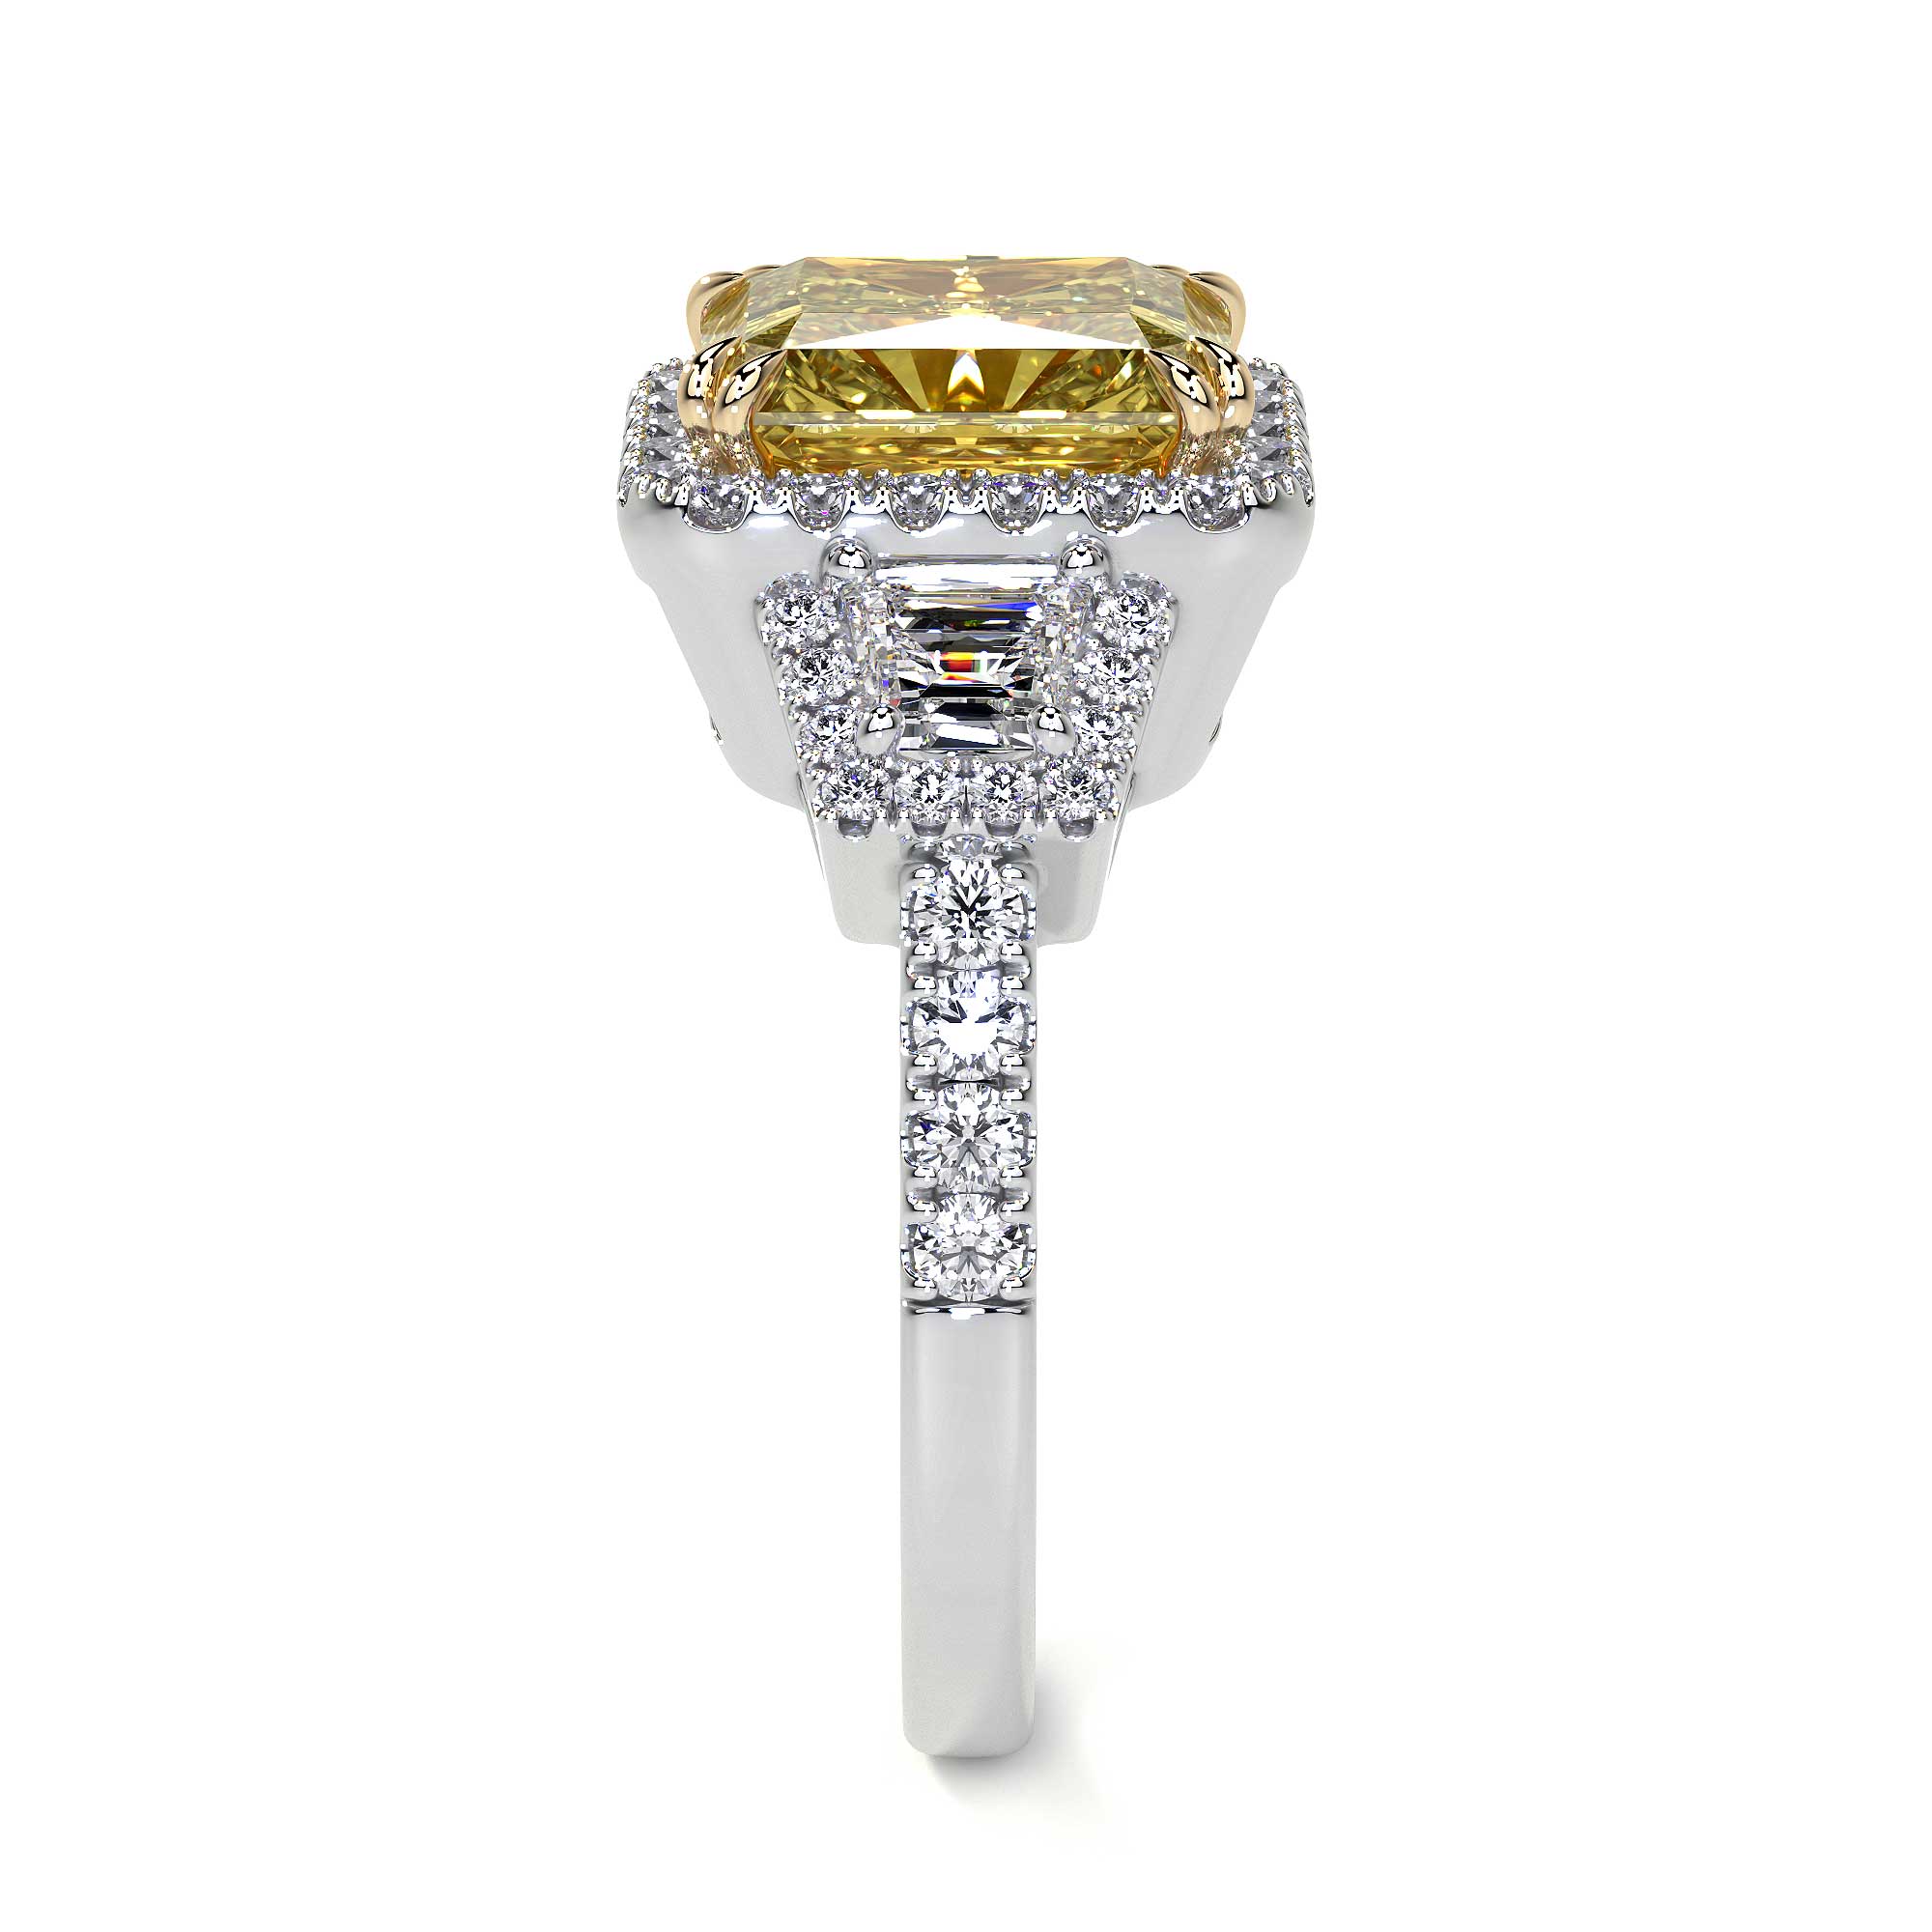 Radiant Fancy Yellow Diamond Ring With Halo, 3 CT - Rings - Leviev Diamonds